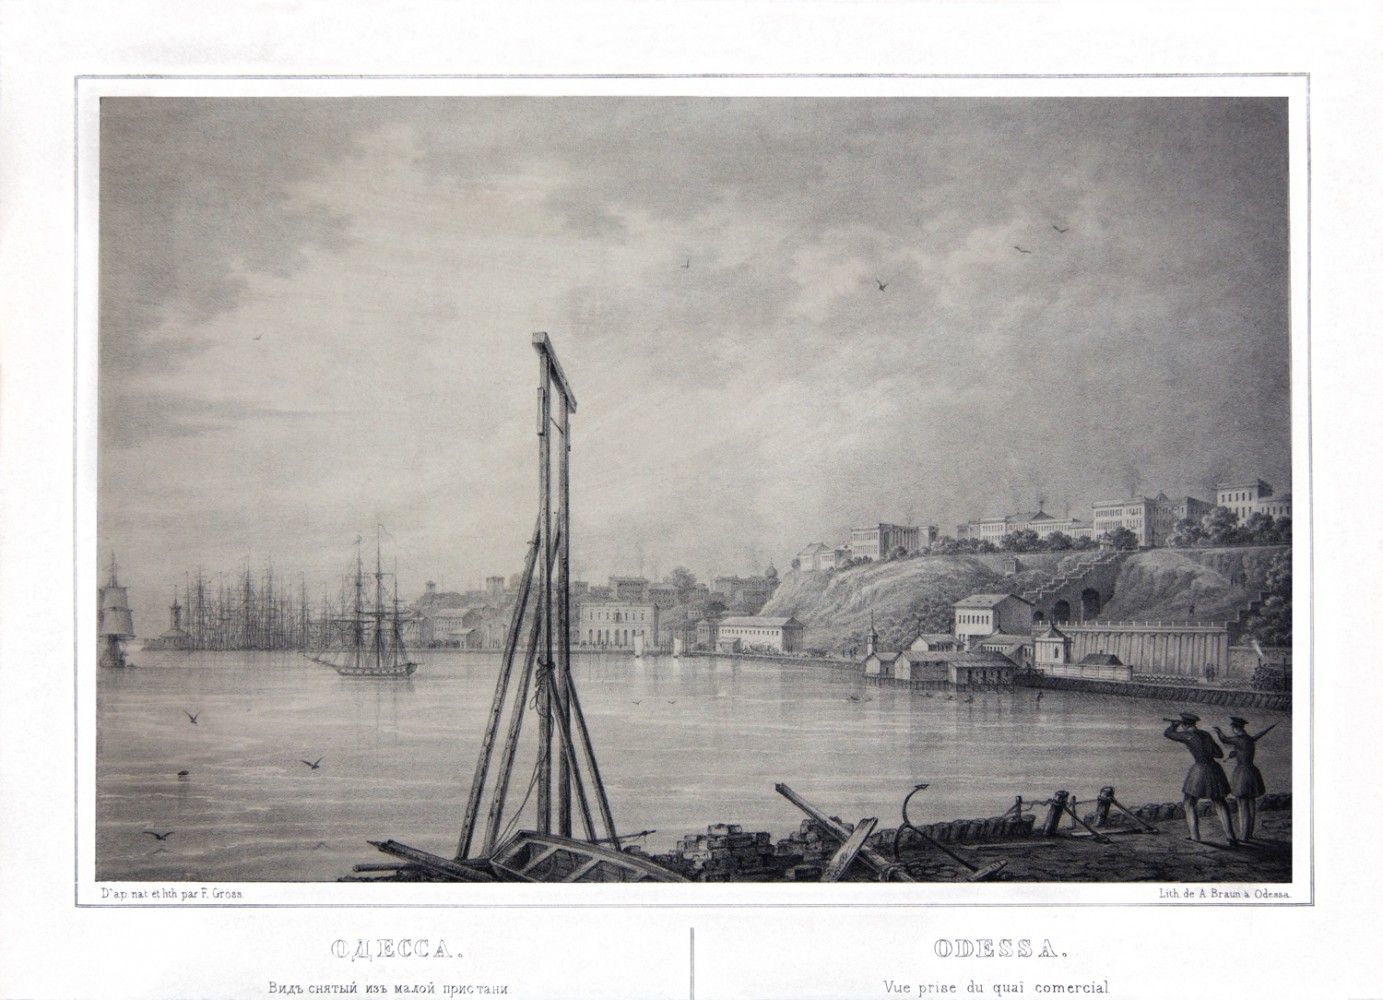 Odesa. A View Taken from a Small Pier. 1850s.